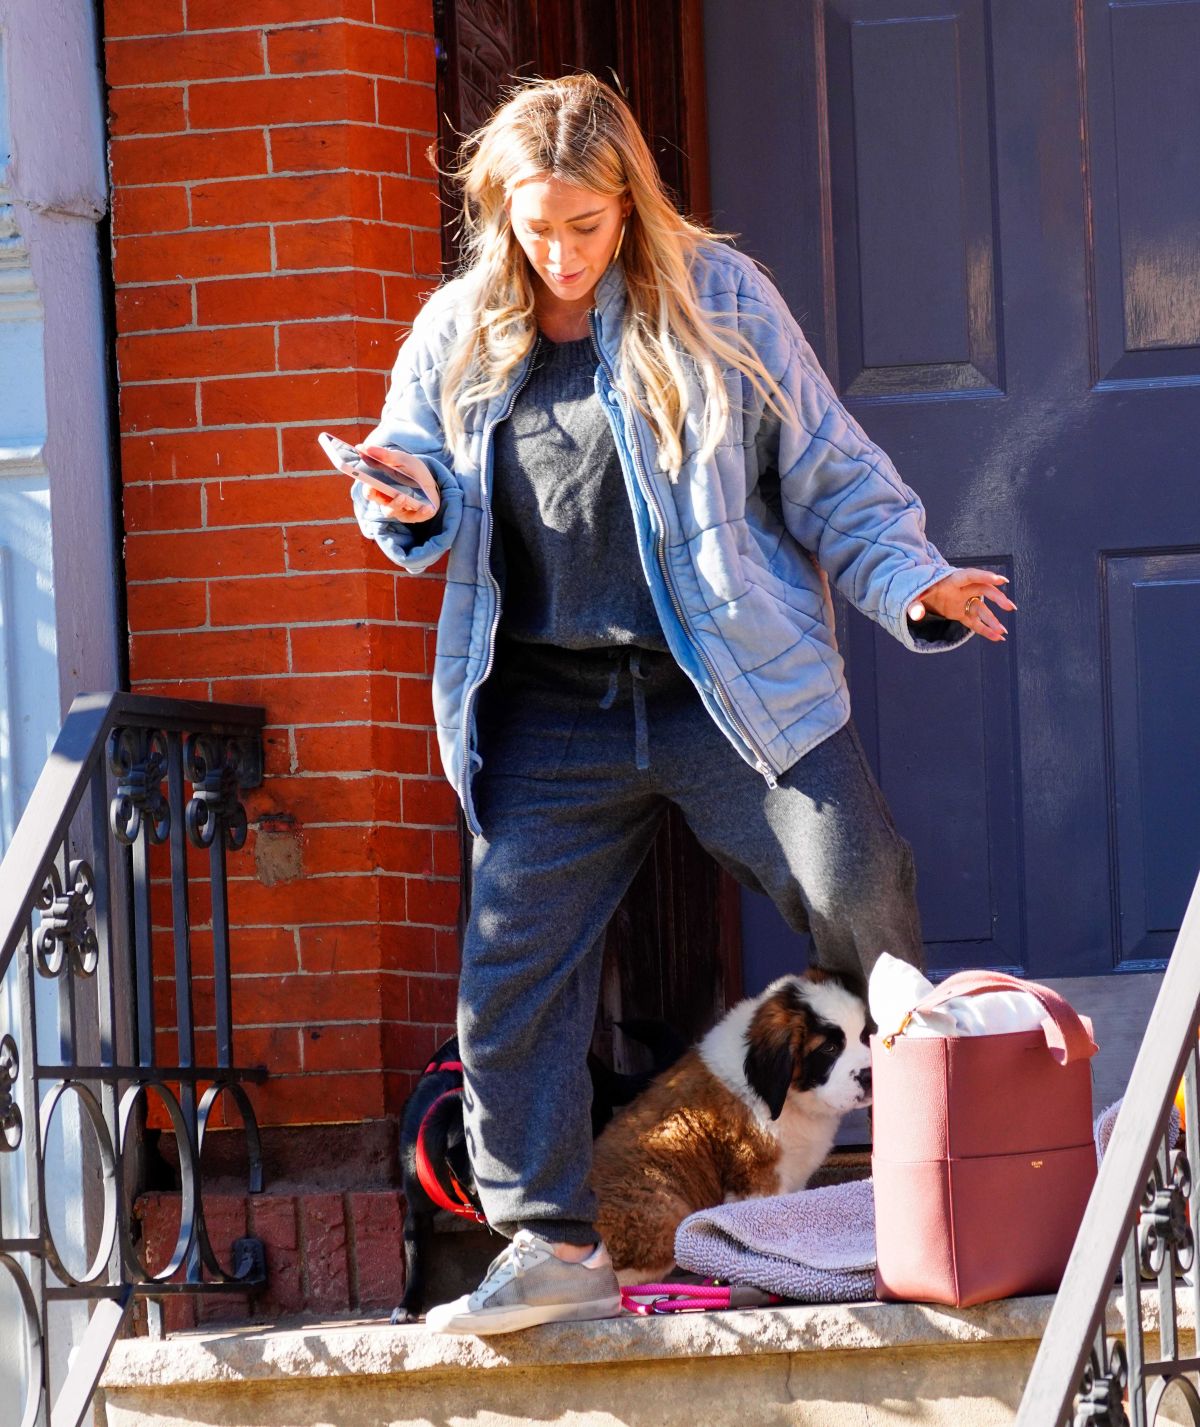 hilary-duff-out-with-her-dog-in-new-york-11-14-2020-6.jpg